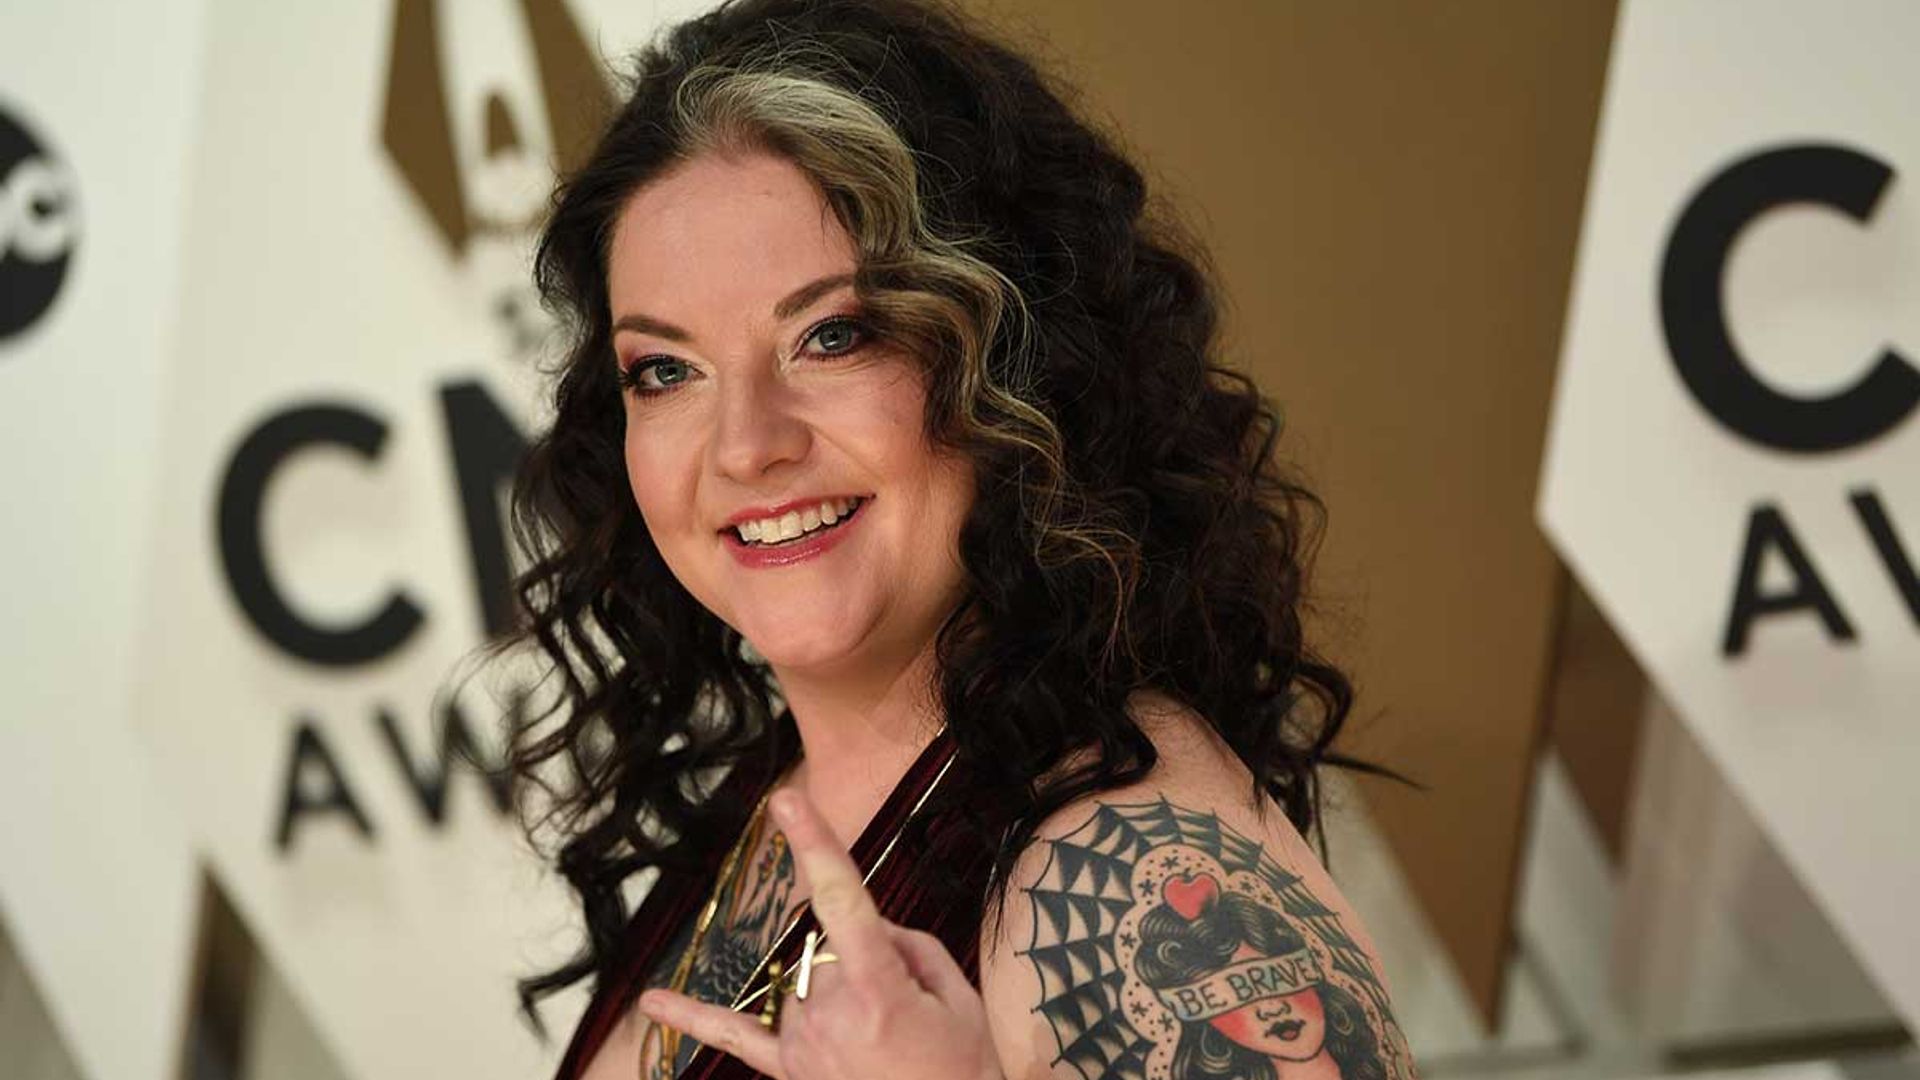 CMA Awards Ashley McBryde reveals stern warning she received ahead of